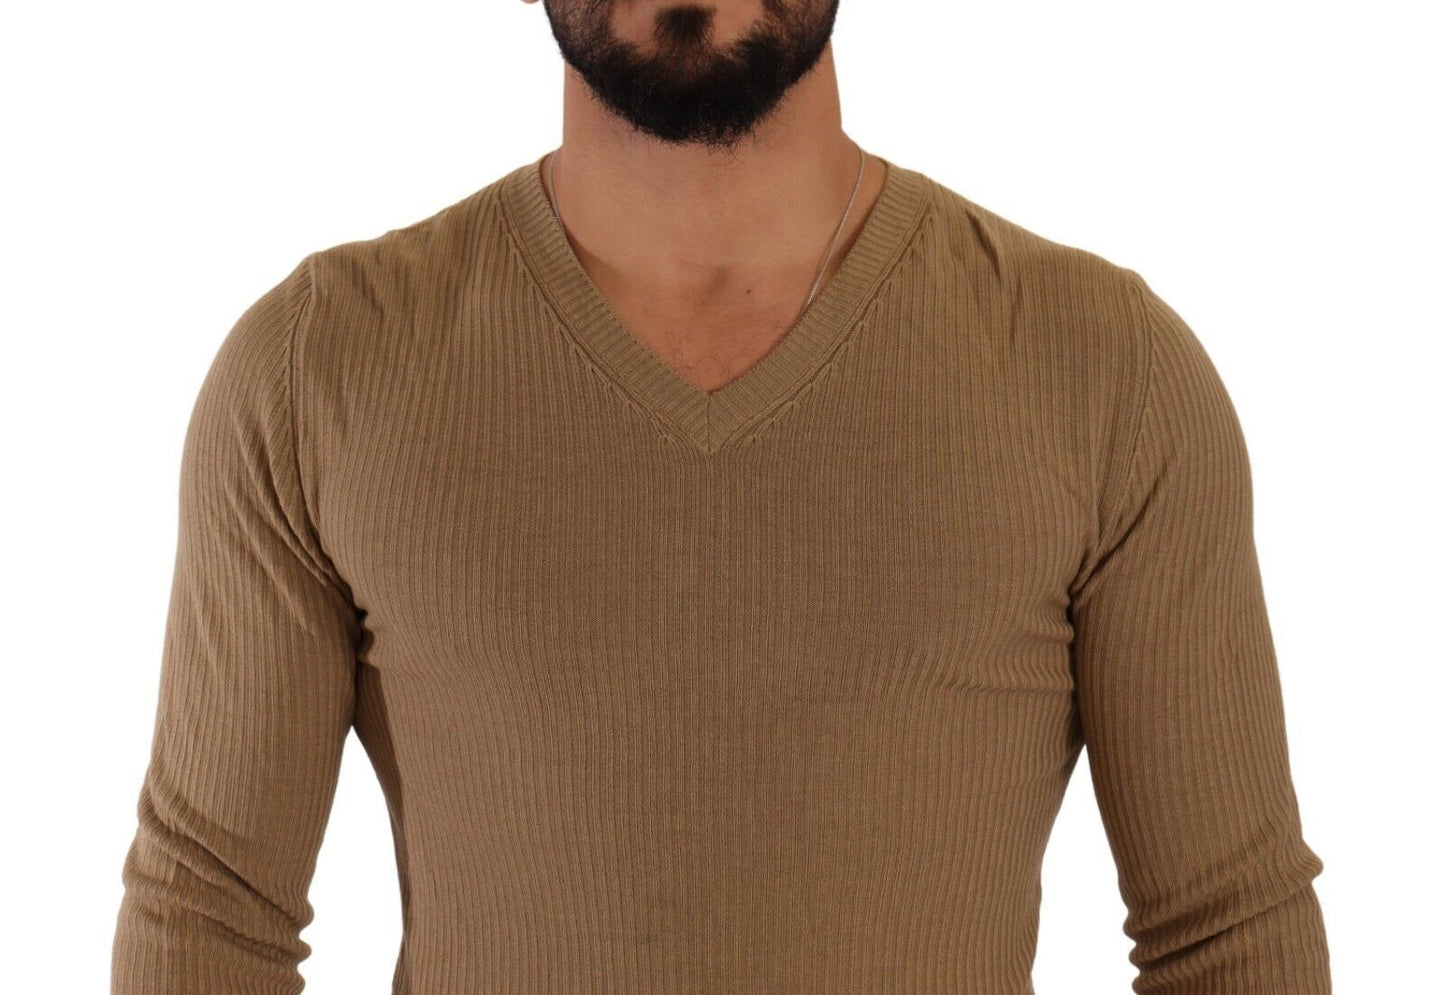 Ermanno Scervino Classic V-Neck Wool Sweater in Brown